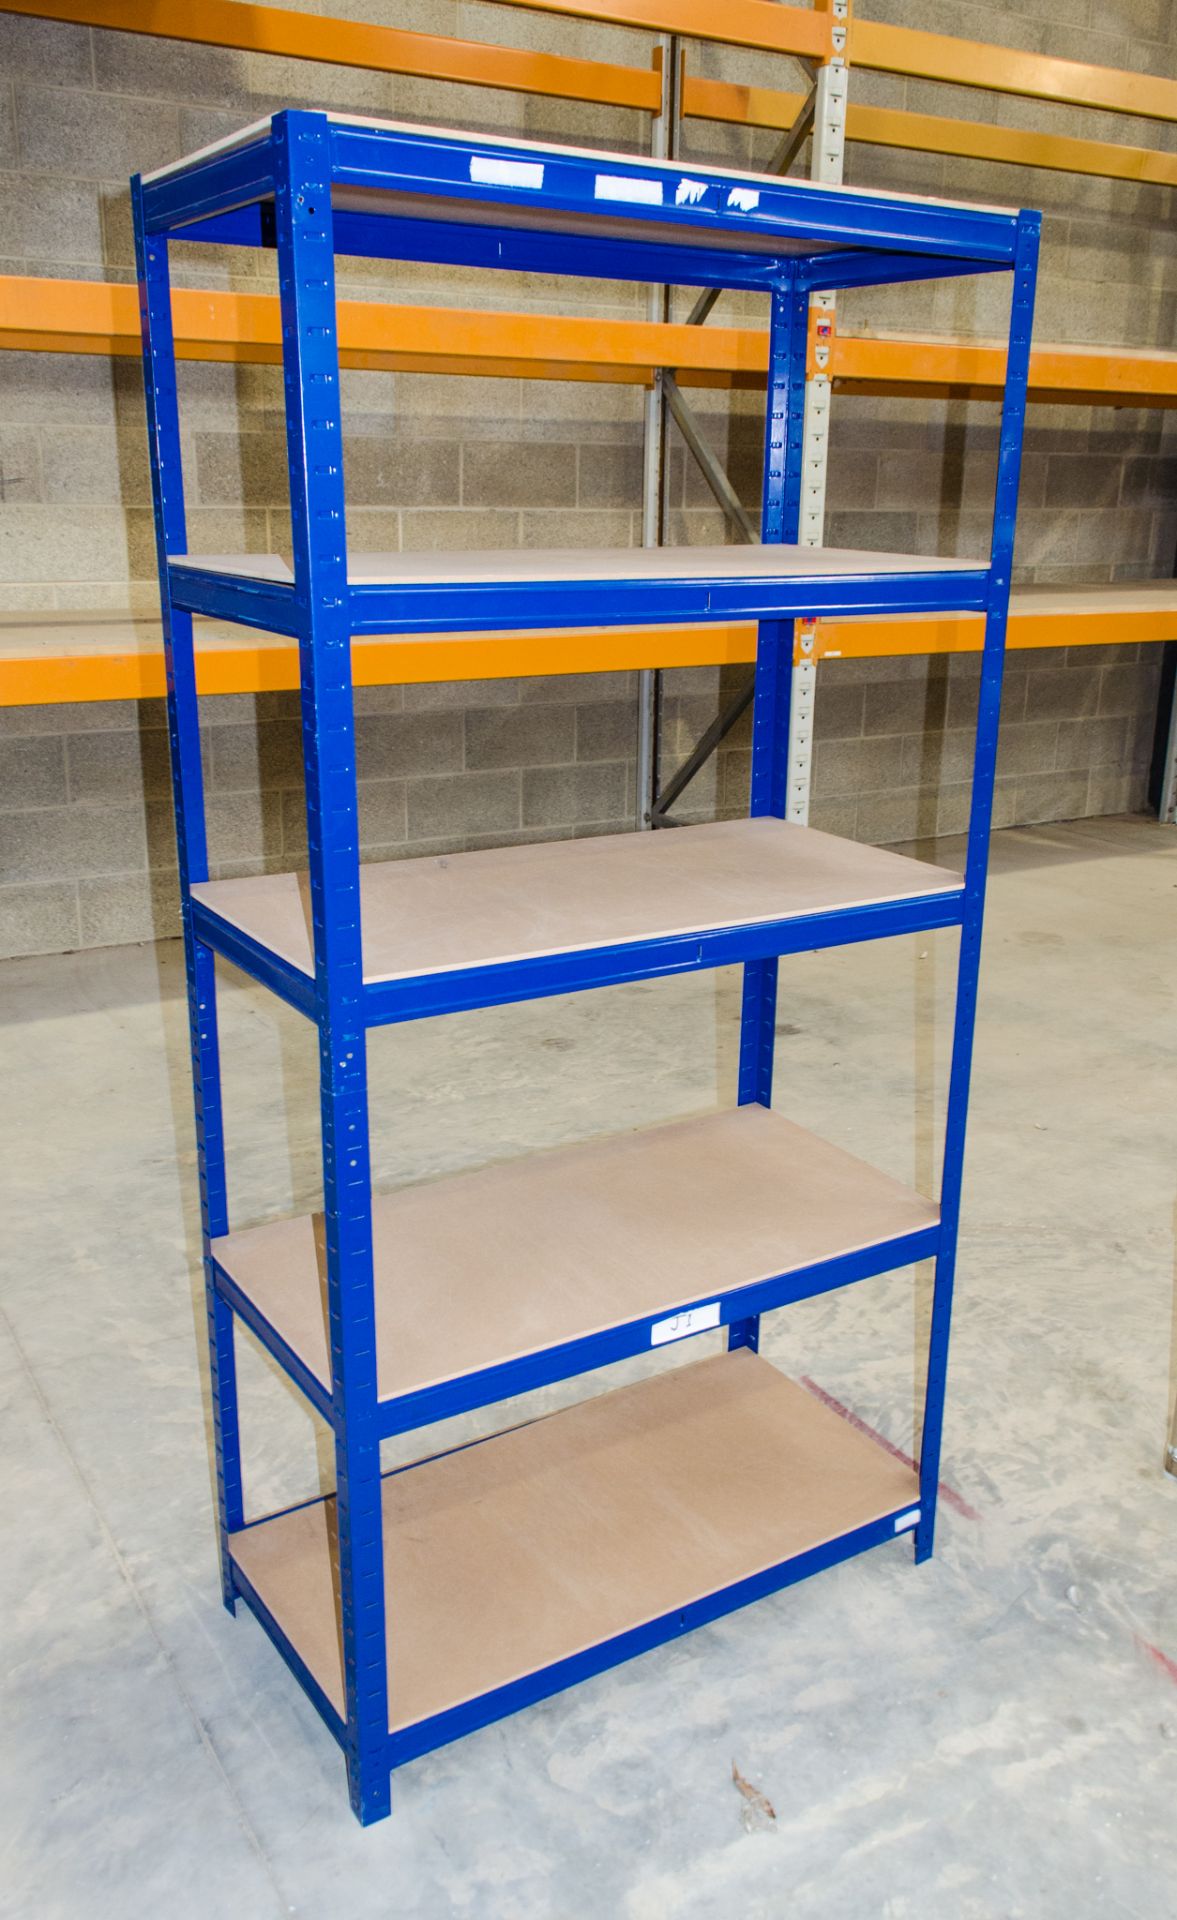 Steel shelving unit Dimensions: 180 cm high x 90 cm wide x 45 cm deep ** Picture for display